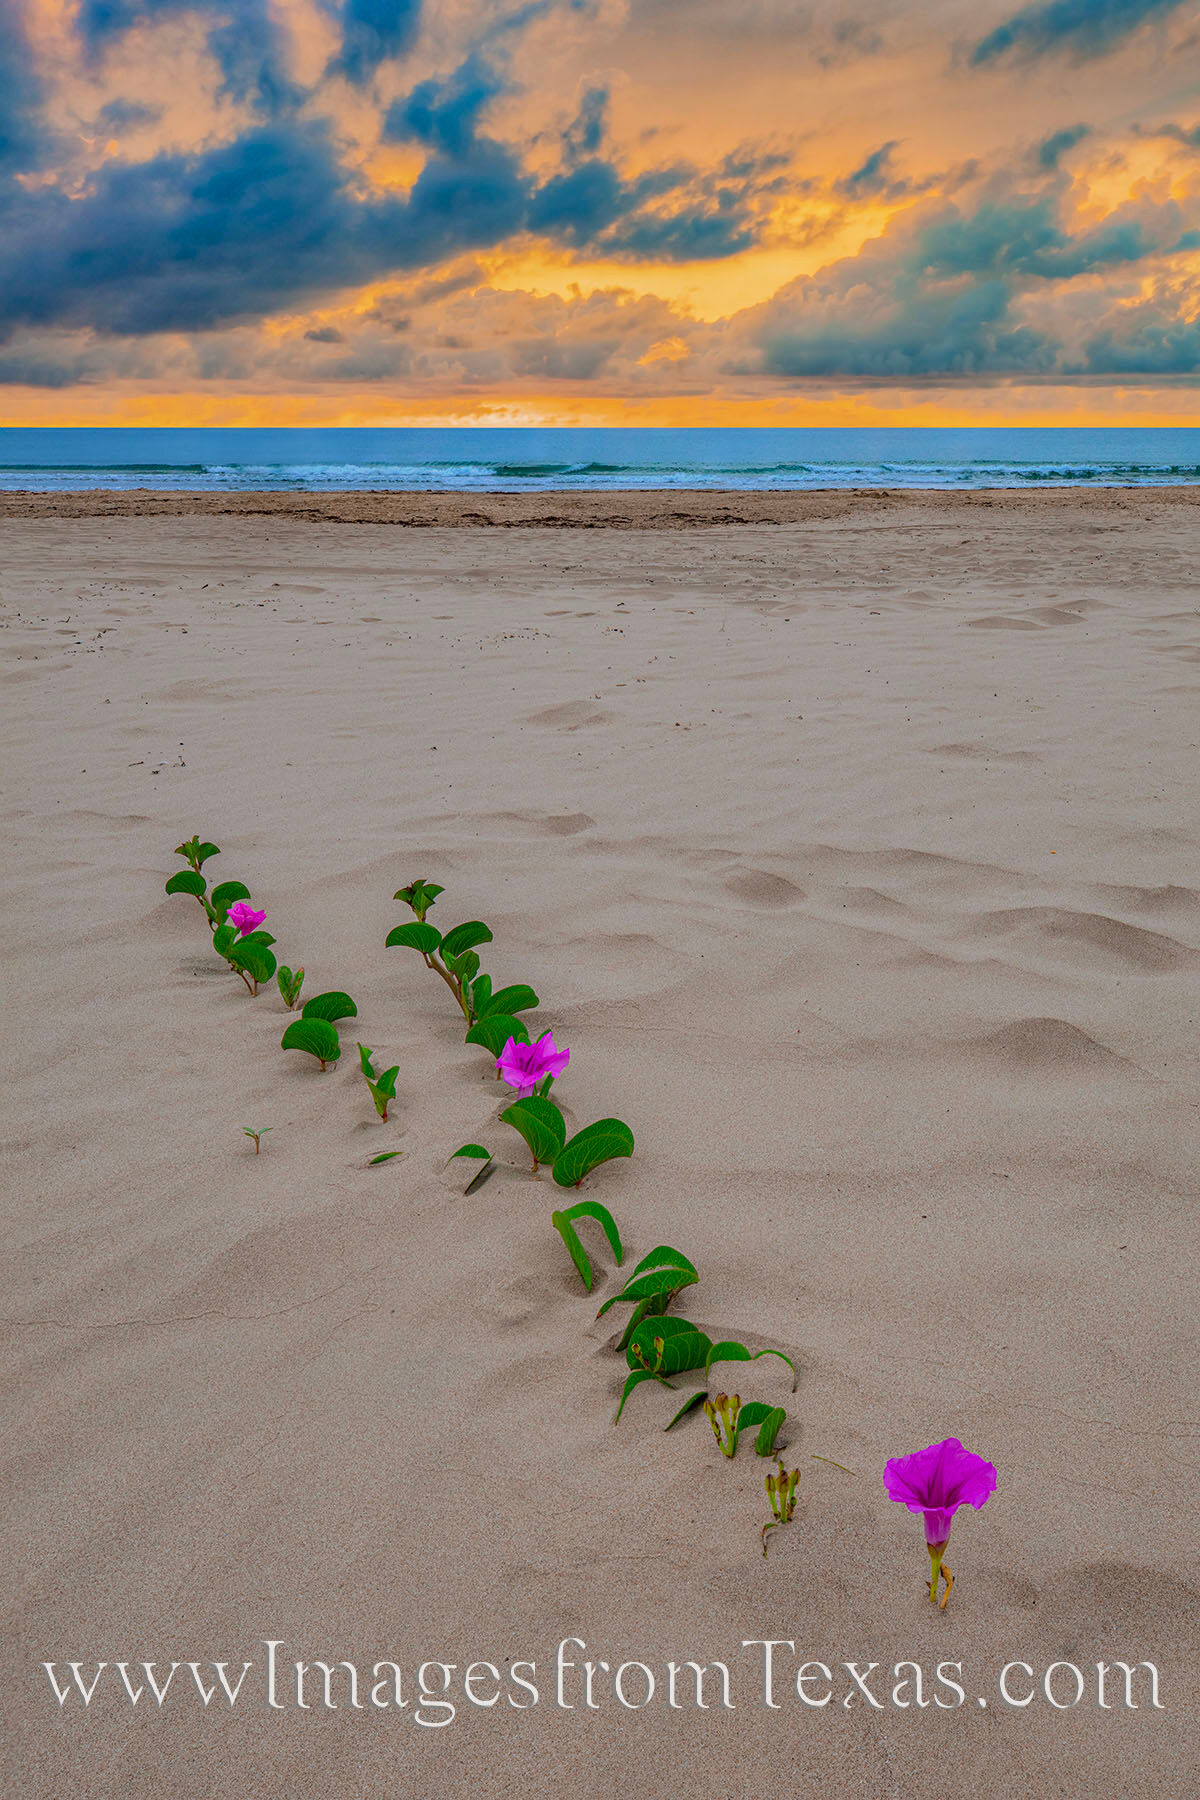 I arrived well before sunrise at a remote beach on South Padre Island. However, I had to wait for a while for these morning glories...